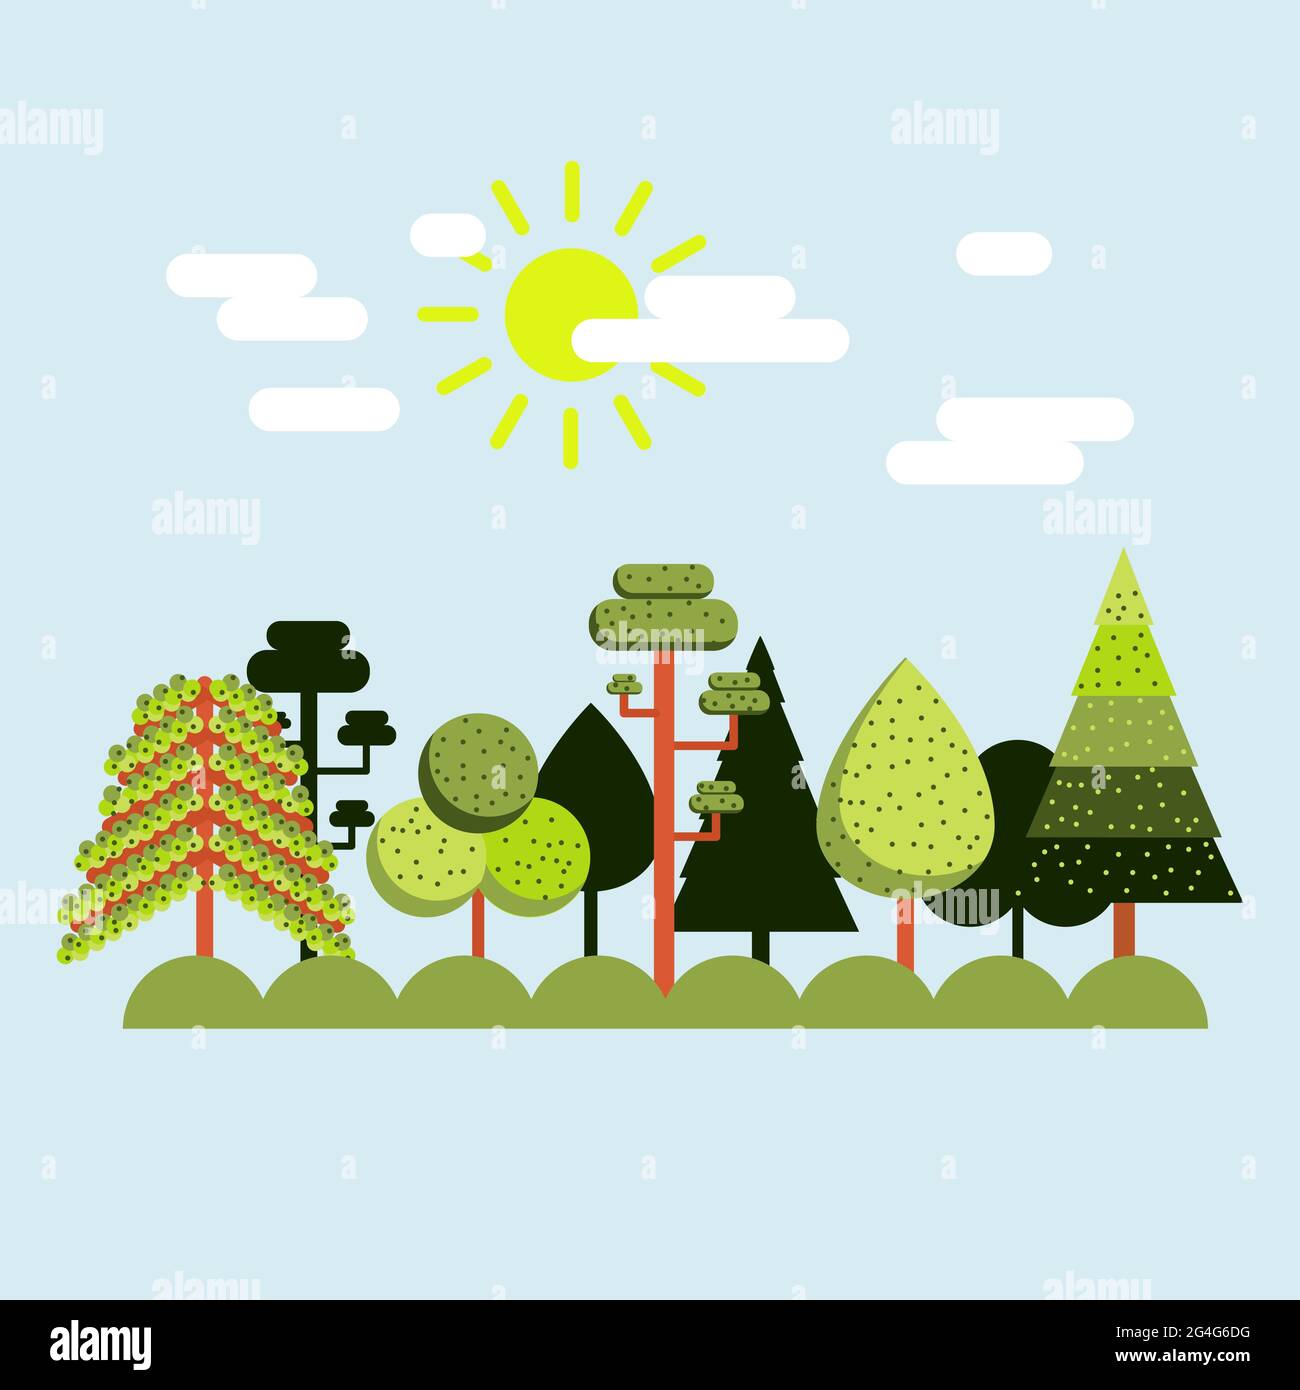 Summer landscape with trees and pines. Sunny day. Flat design. Stock Vector